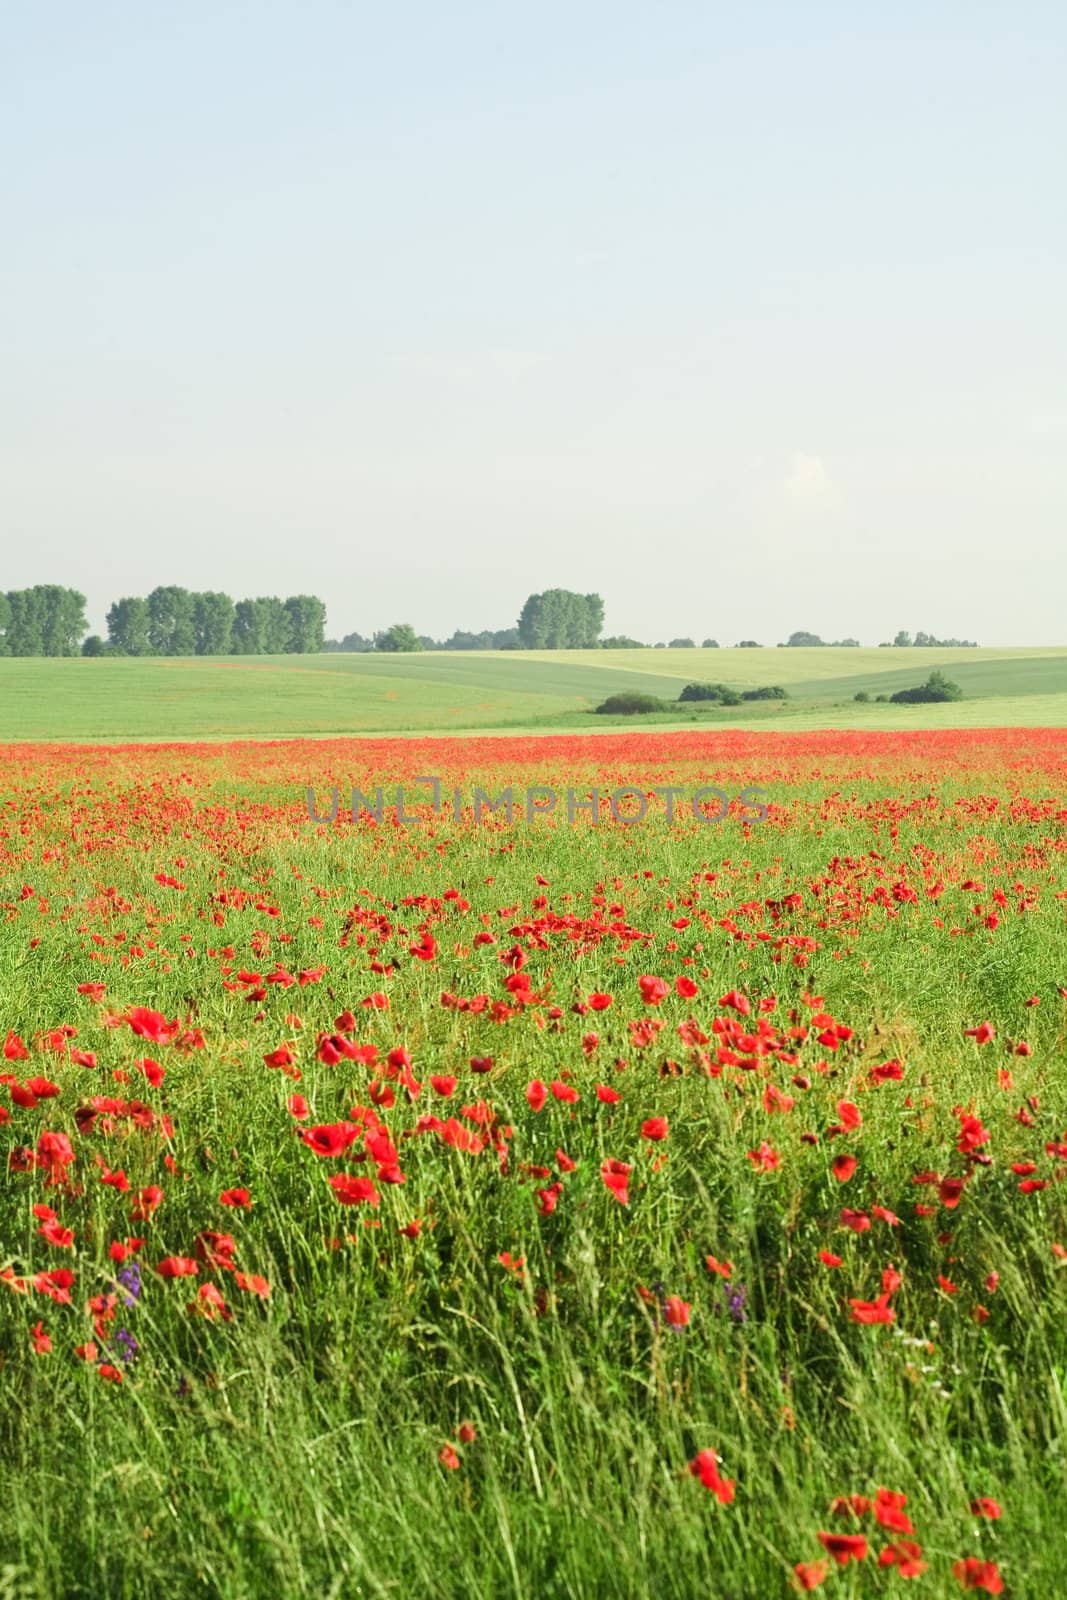 An image of beautiful field with poppies